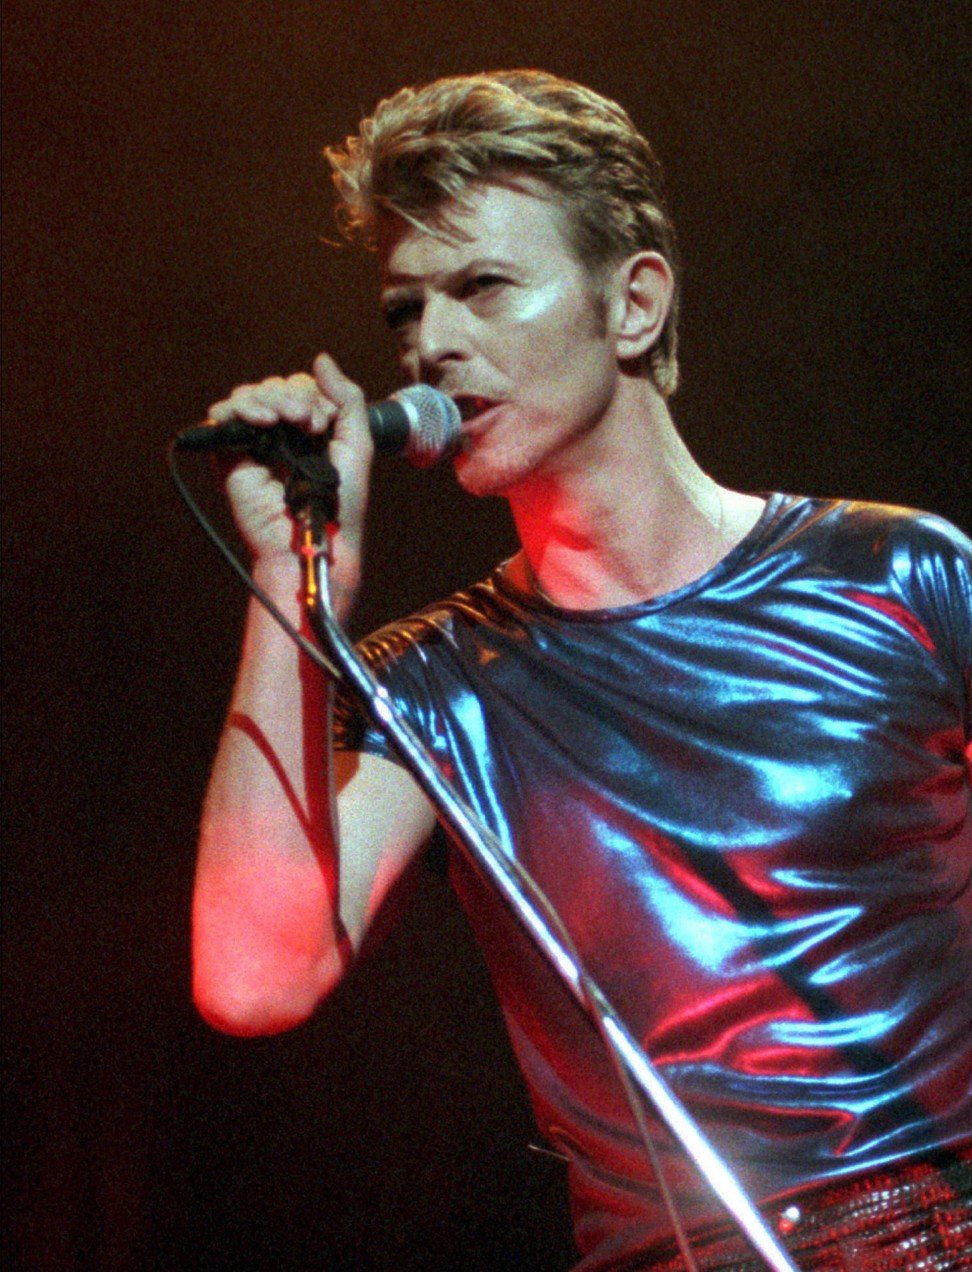 David Bowie, the innovative and iconic singer whose illustrious career lasted five decades, helped start the 1970s trend of non-binary dressing. Photo: Bob Child/Associated Press